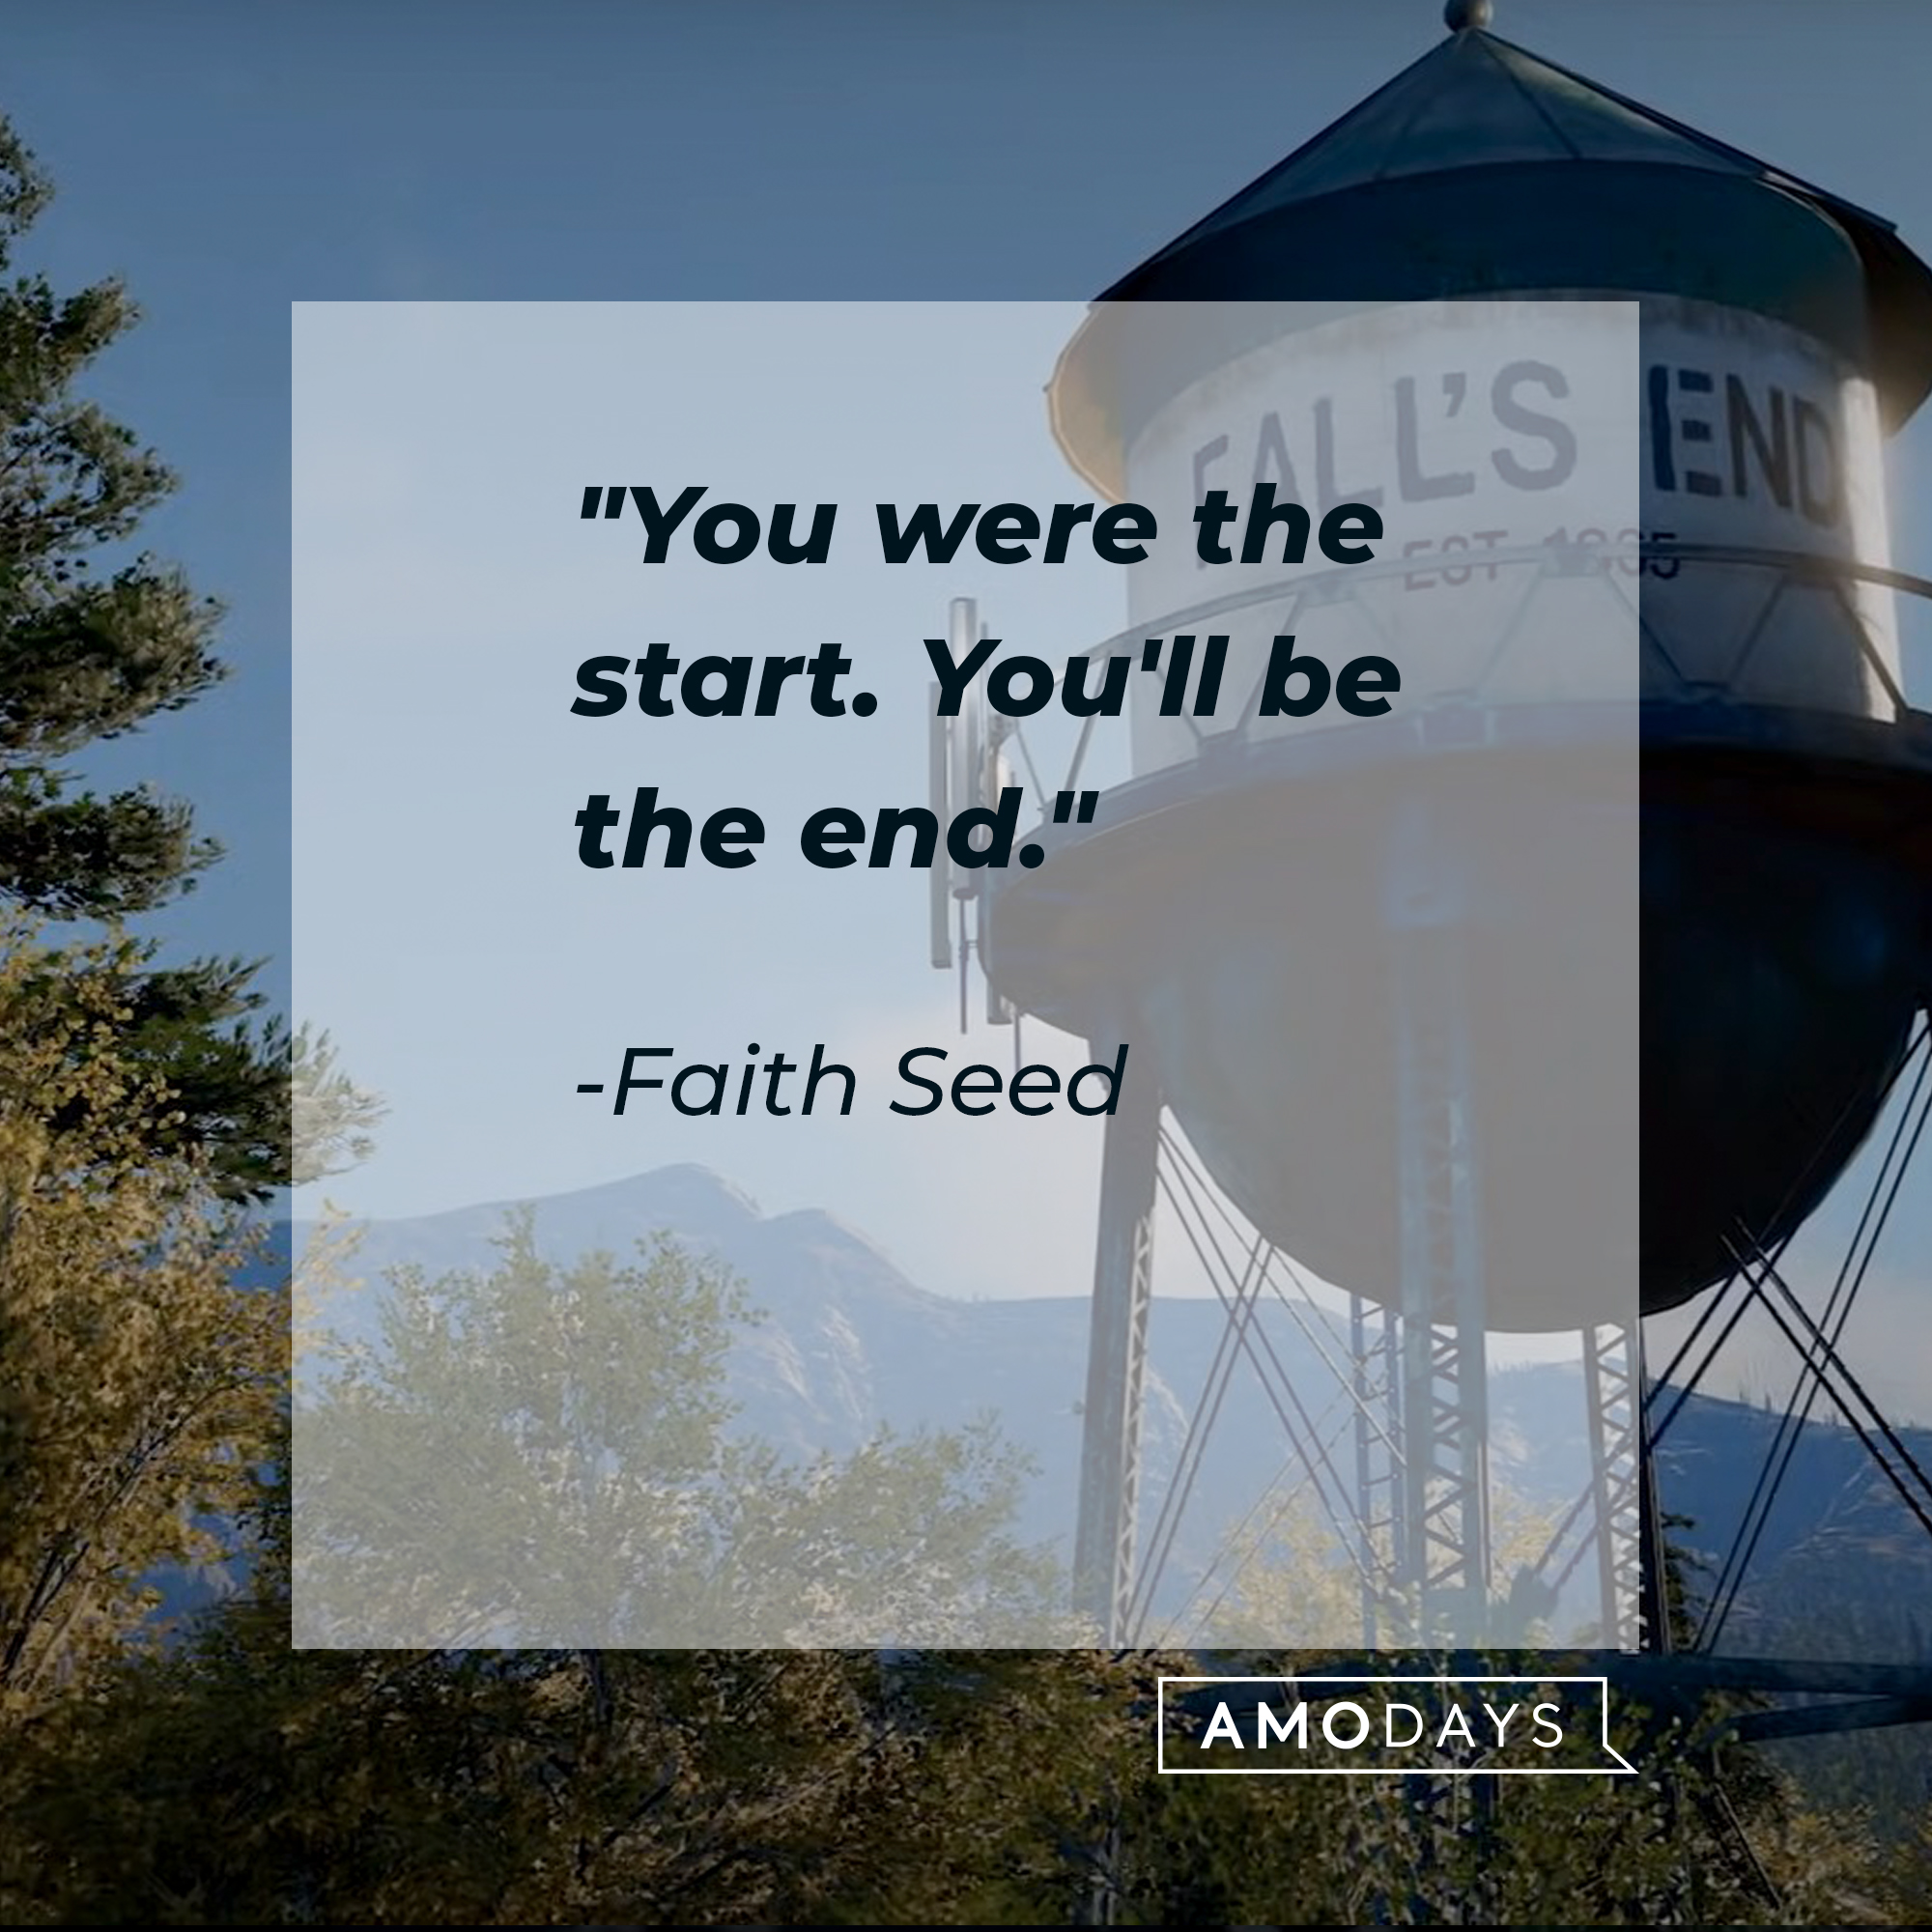 An image of "Far Cry 5" with Faith Seed's quote: "You were the start. You'll be the end." | Source: youtube.com/Ubisoft North America